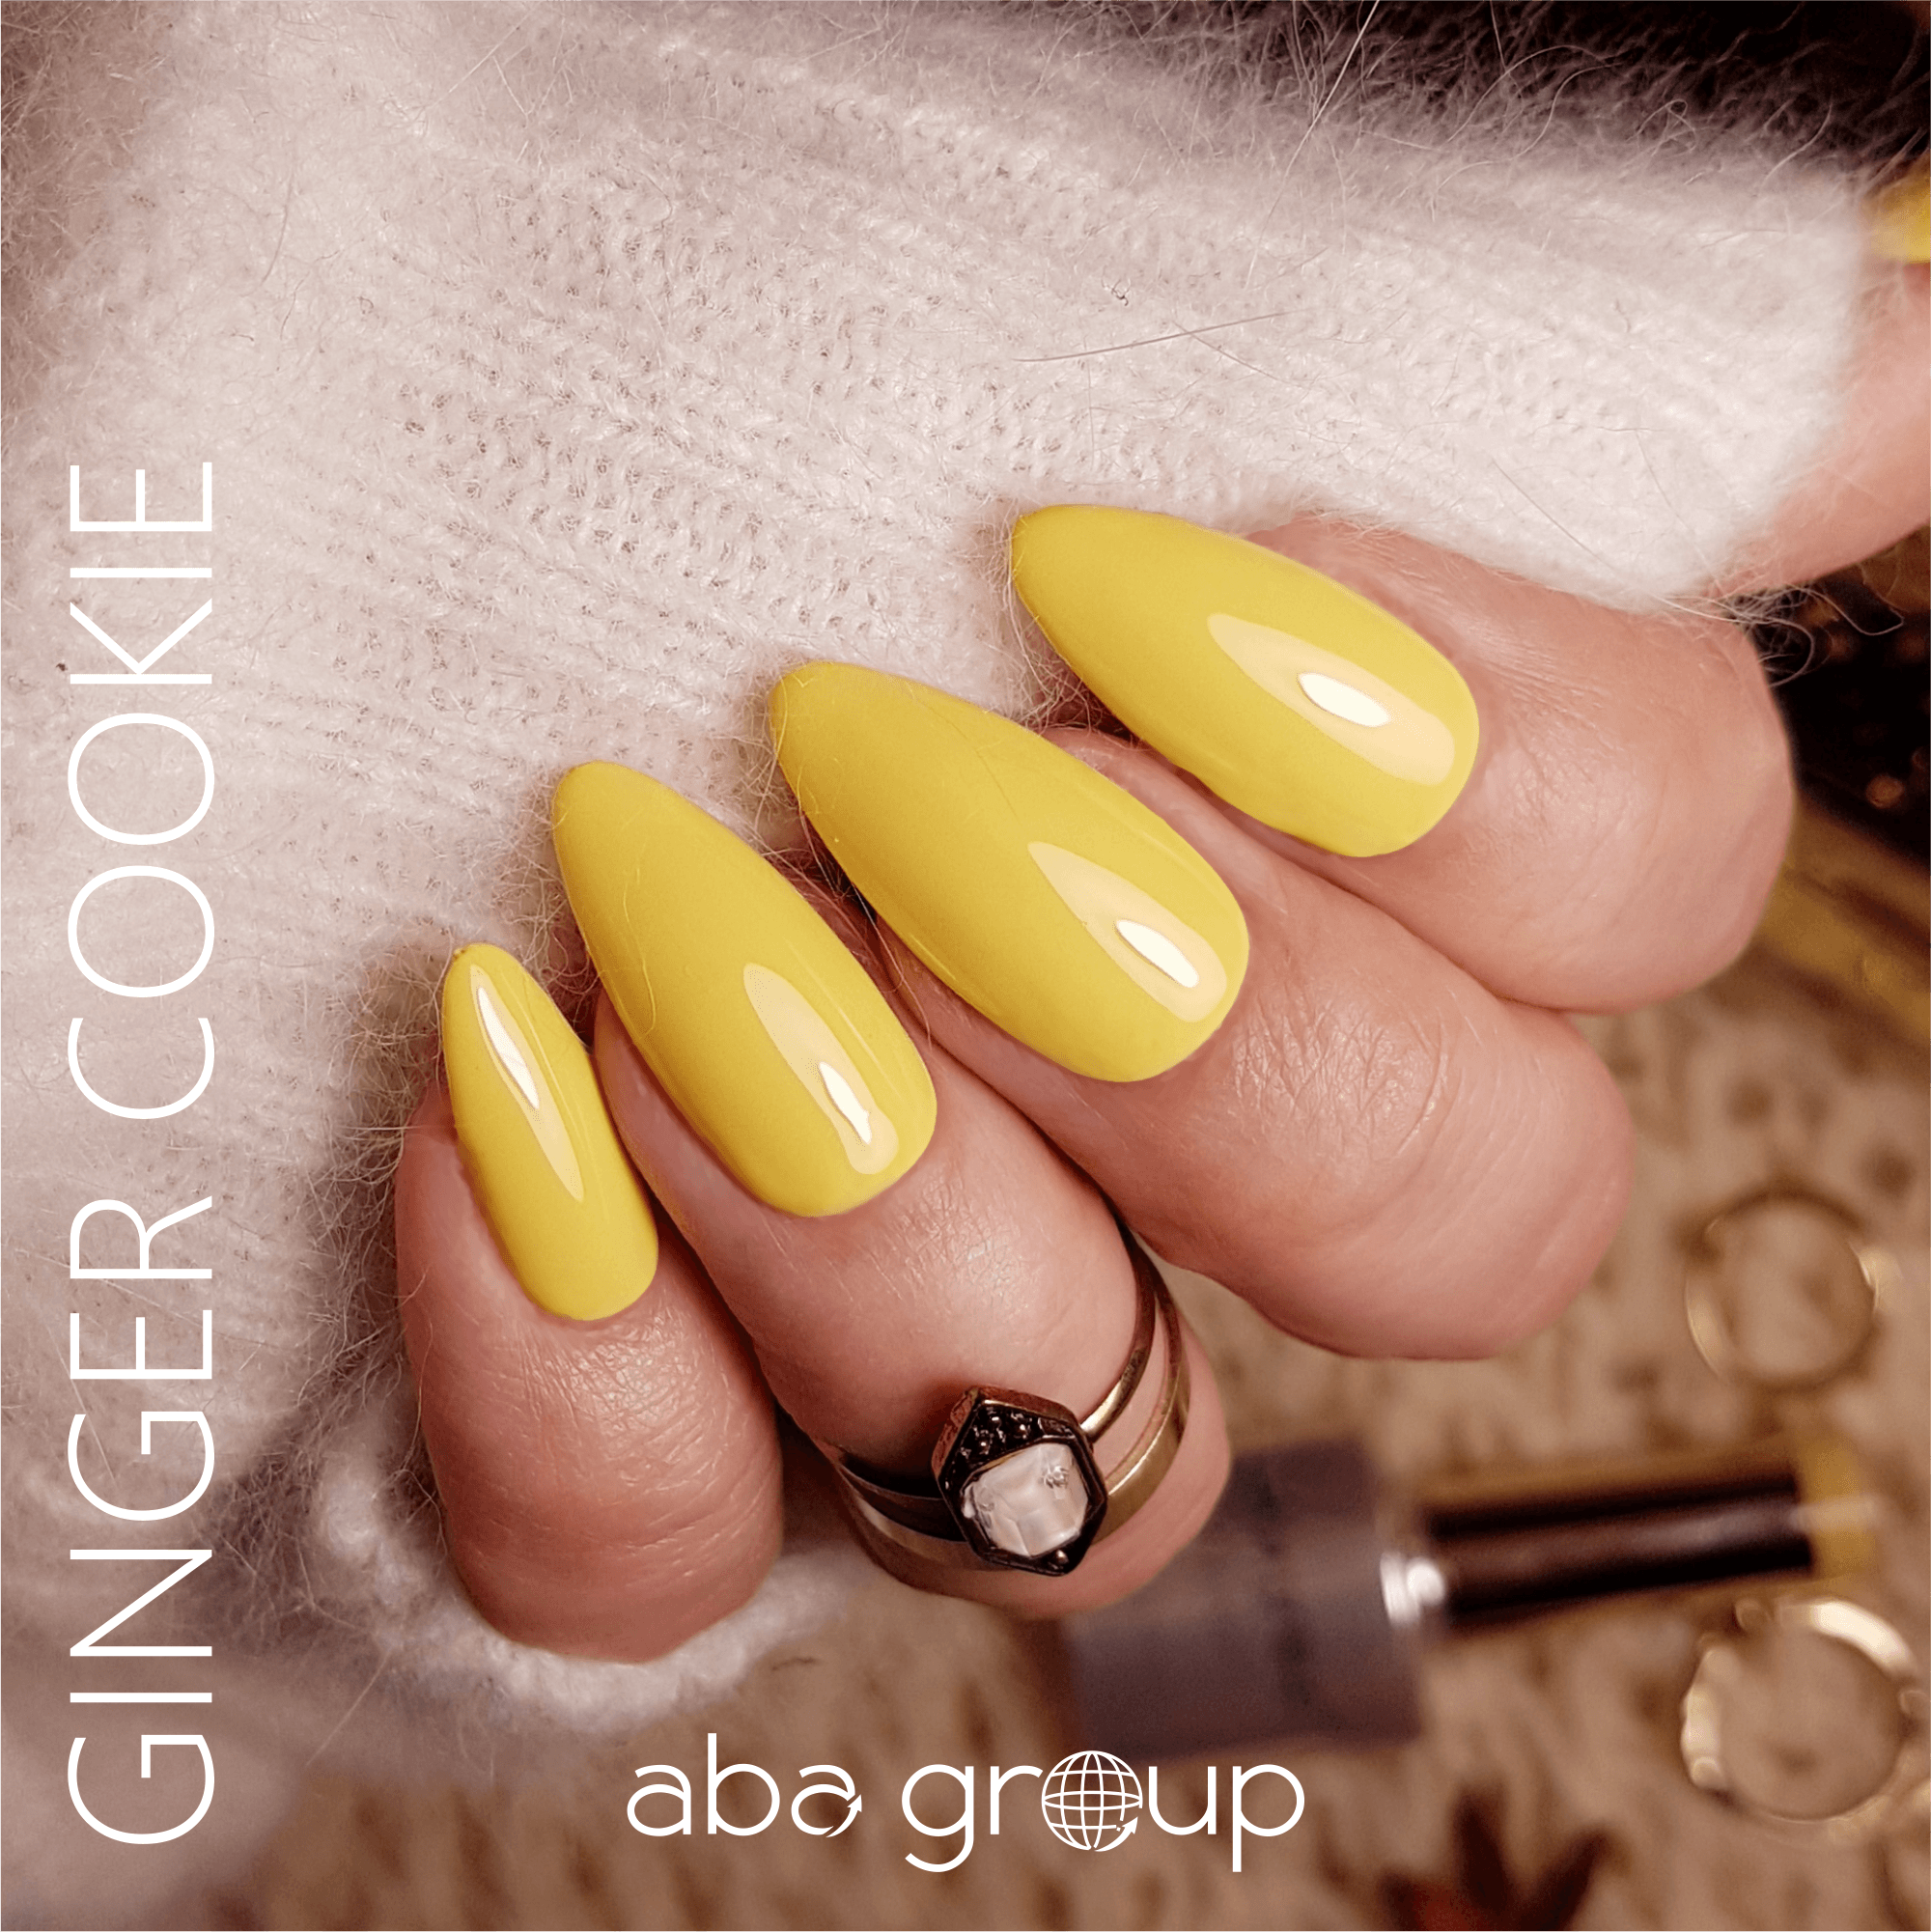 OUTLET – Aba Group Lakier hybrydowy 341 Ginger Cookie – 7ml